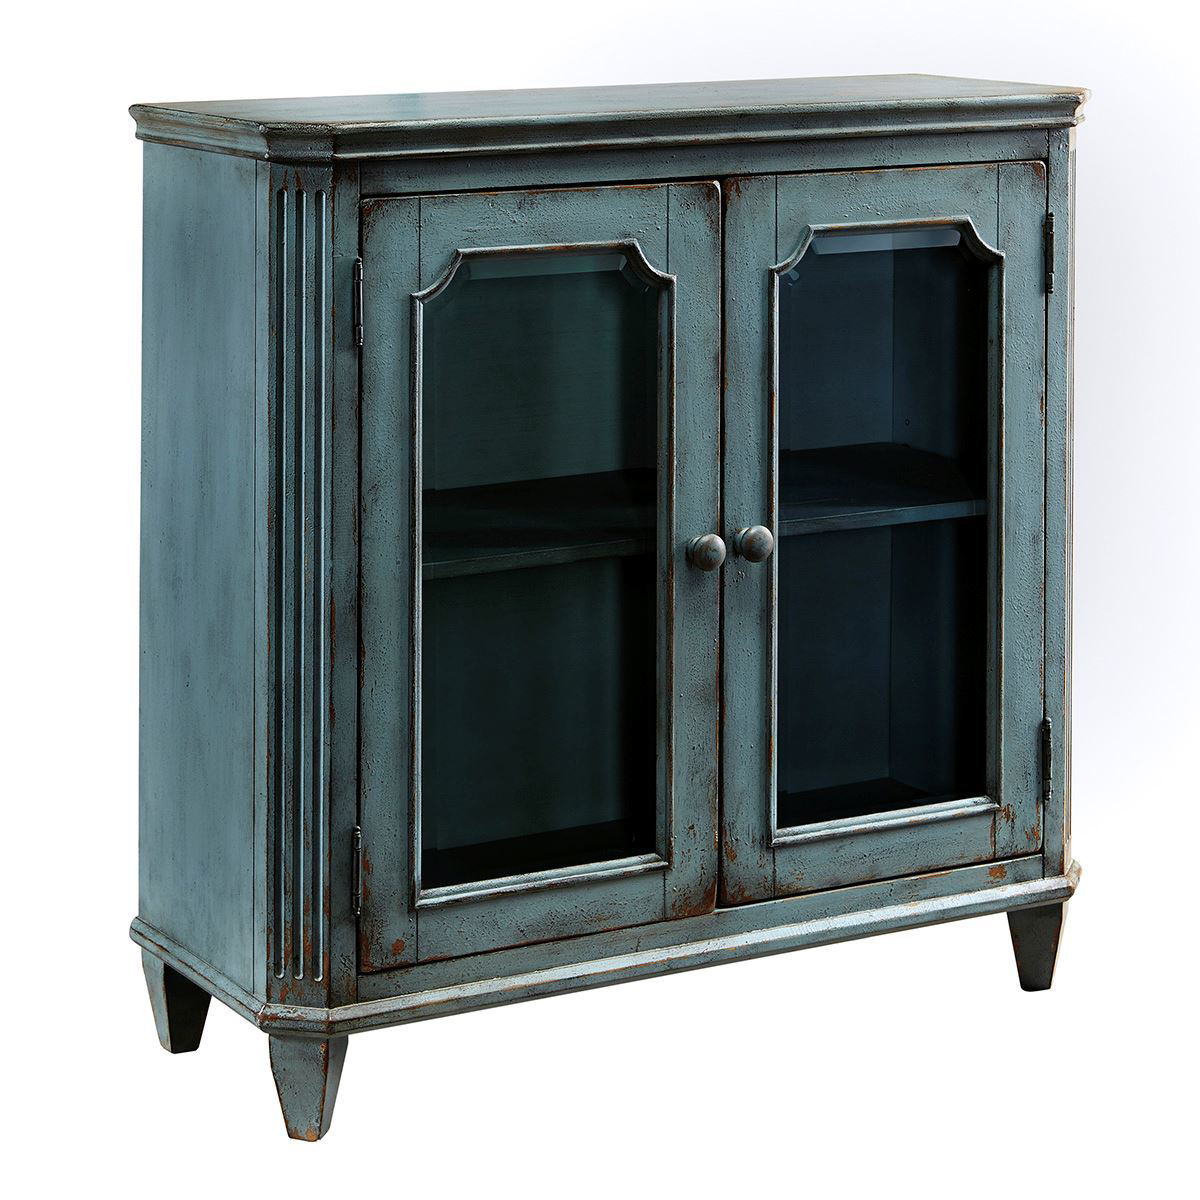 Picture of Accent Cabinet in Antique Teal